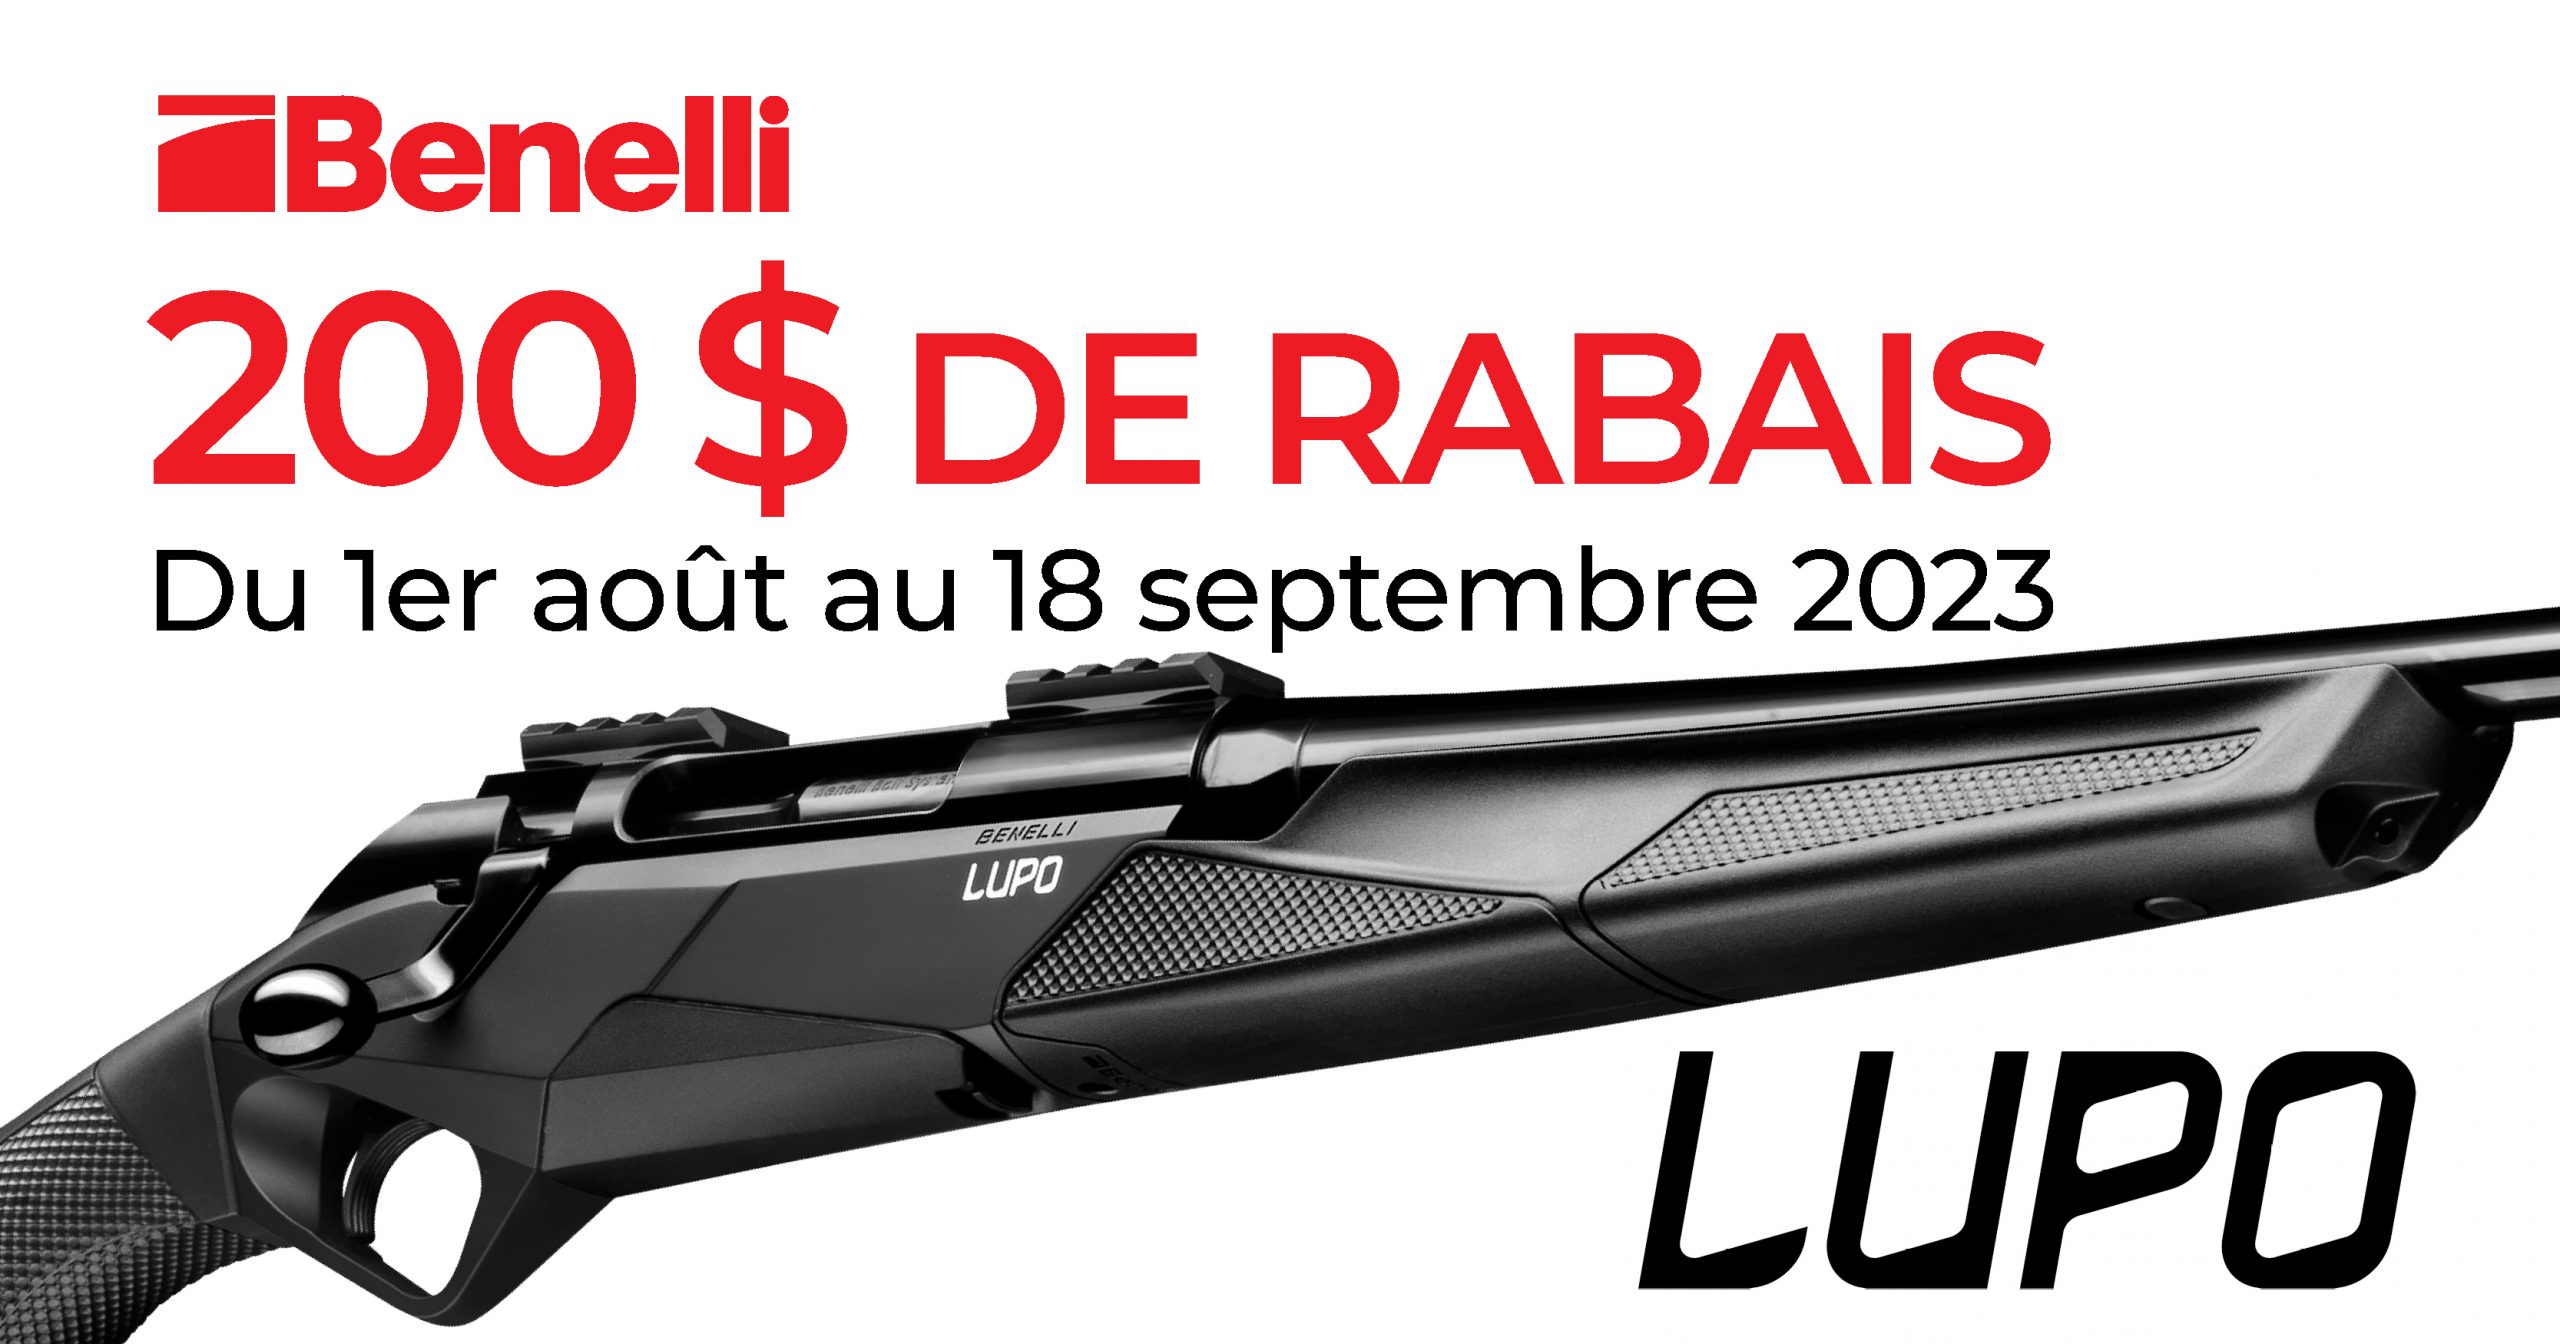 Canada Benelli Lupo 200 Rebate 2023 Banner French